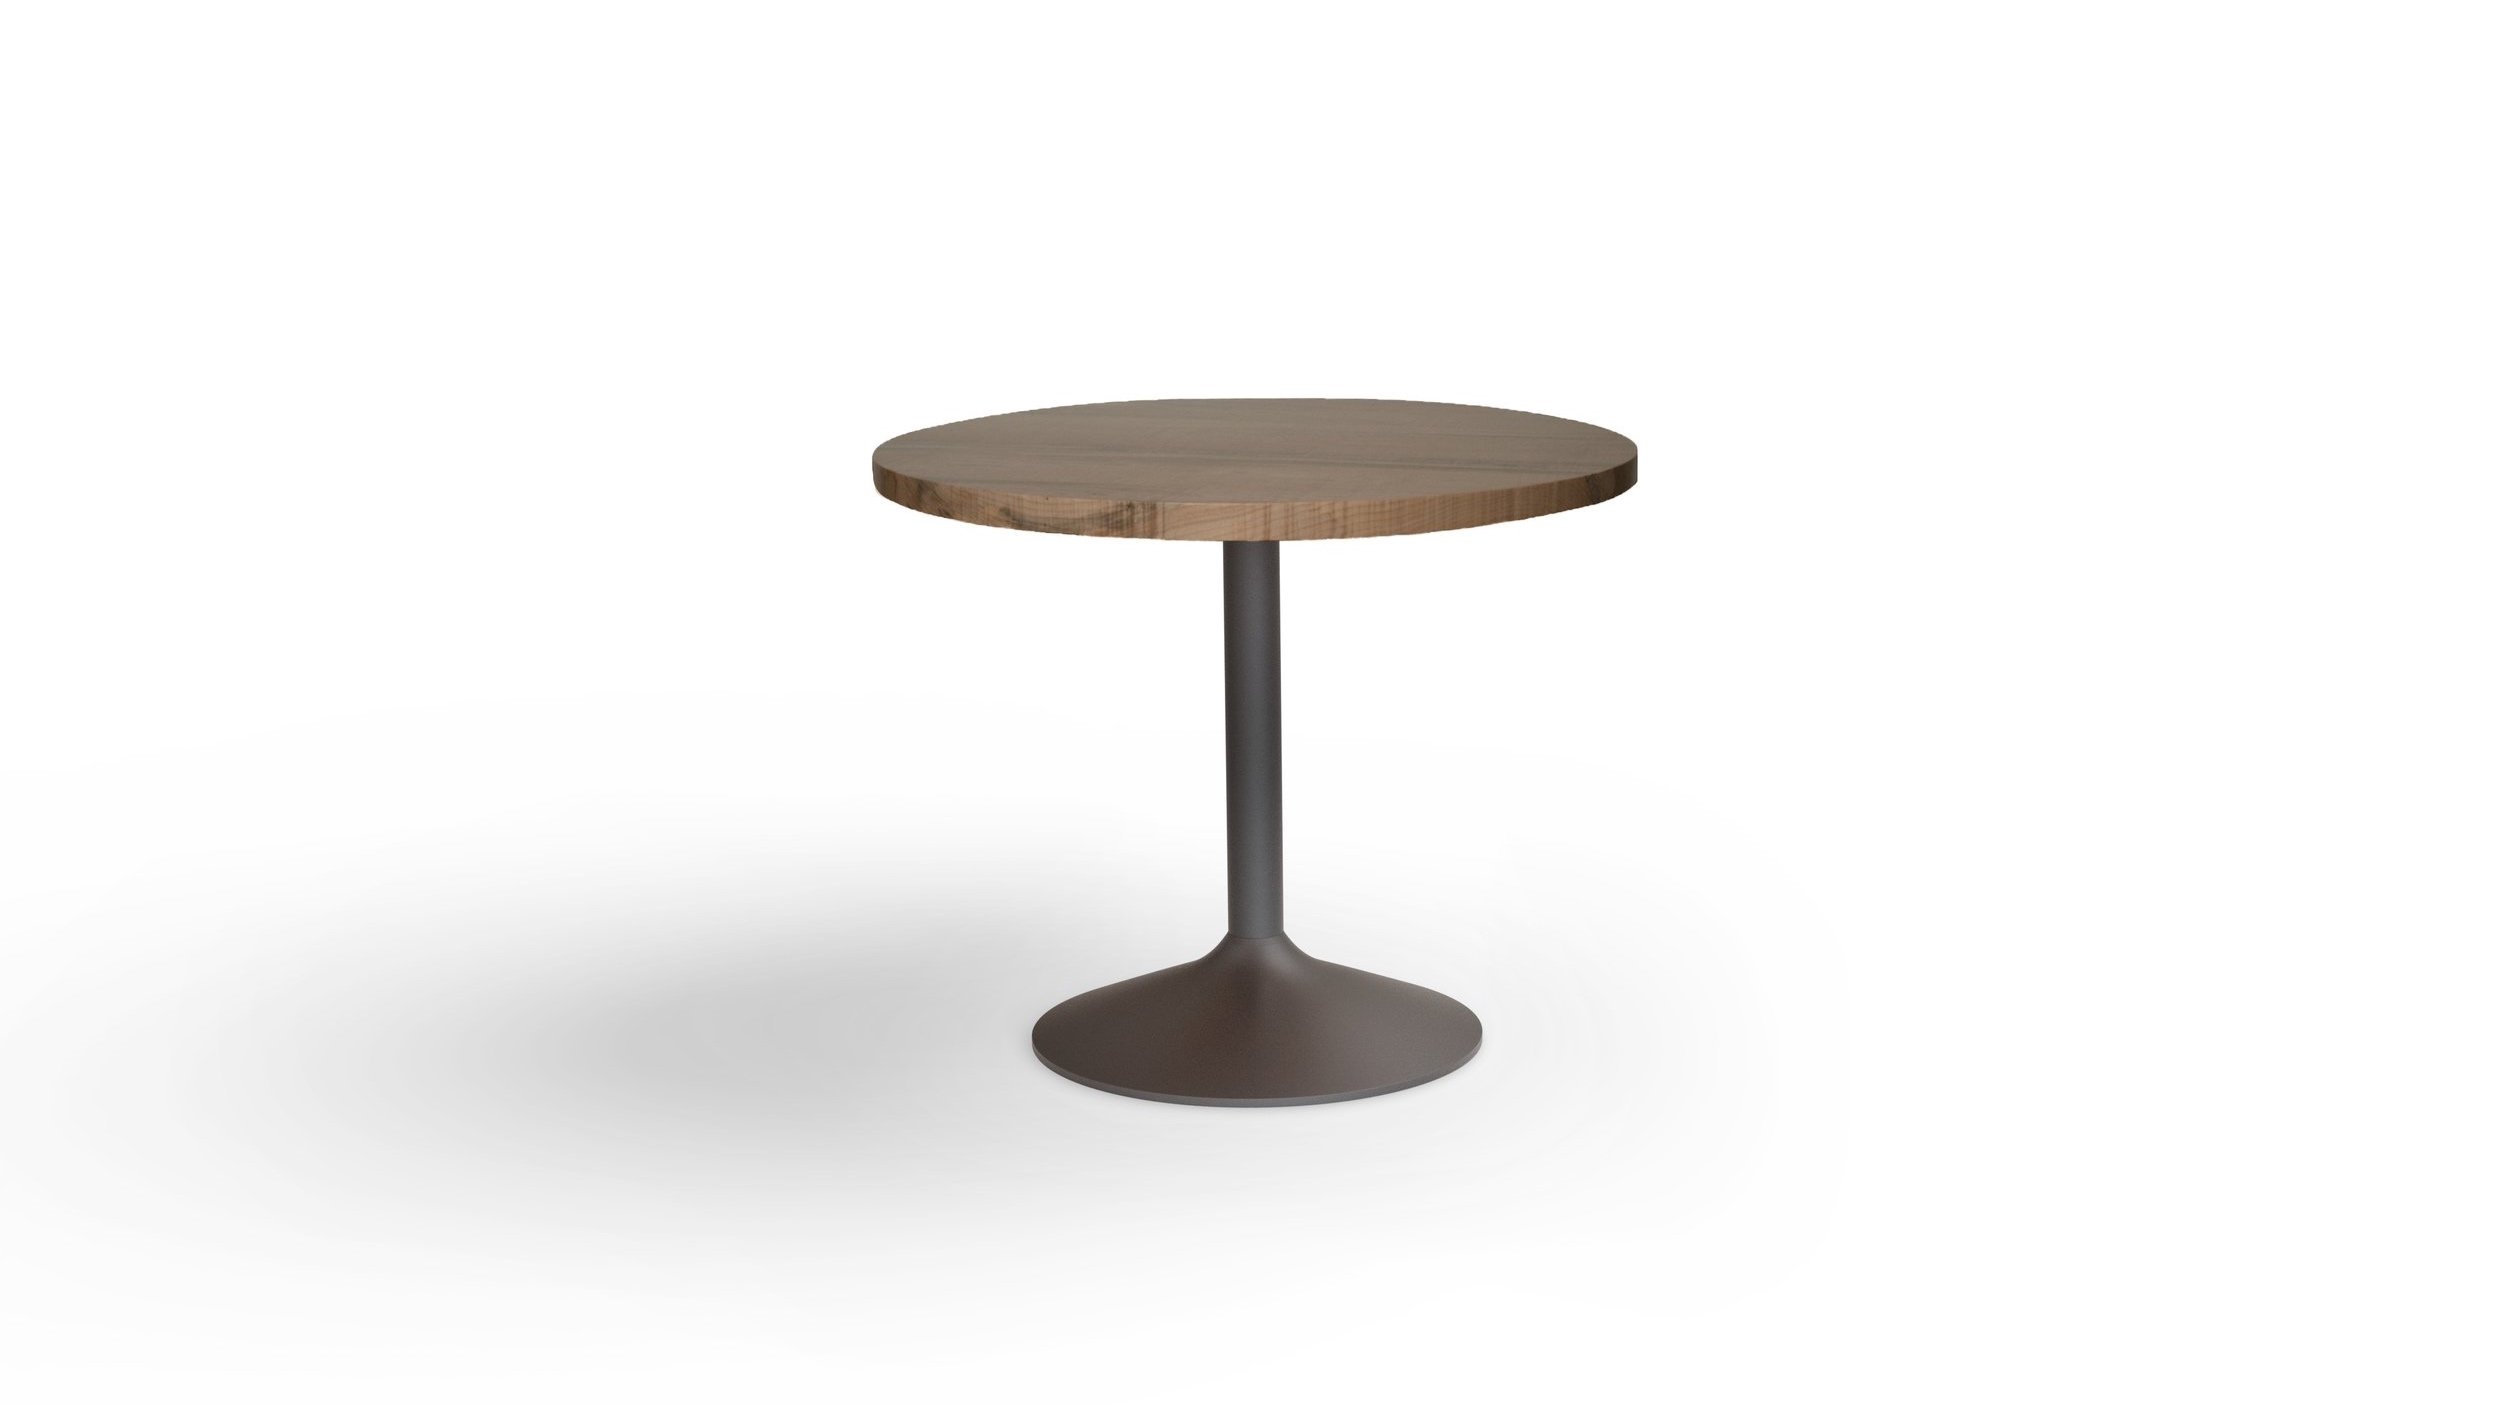 VERSION WITH 36” PLANKED ROUND WALNUT TOP IN CLEAR FINISH; BASE IN BLACK FINISH